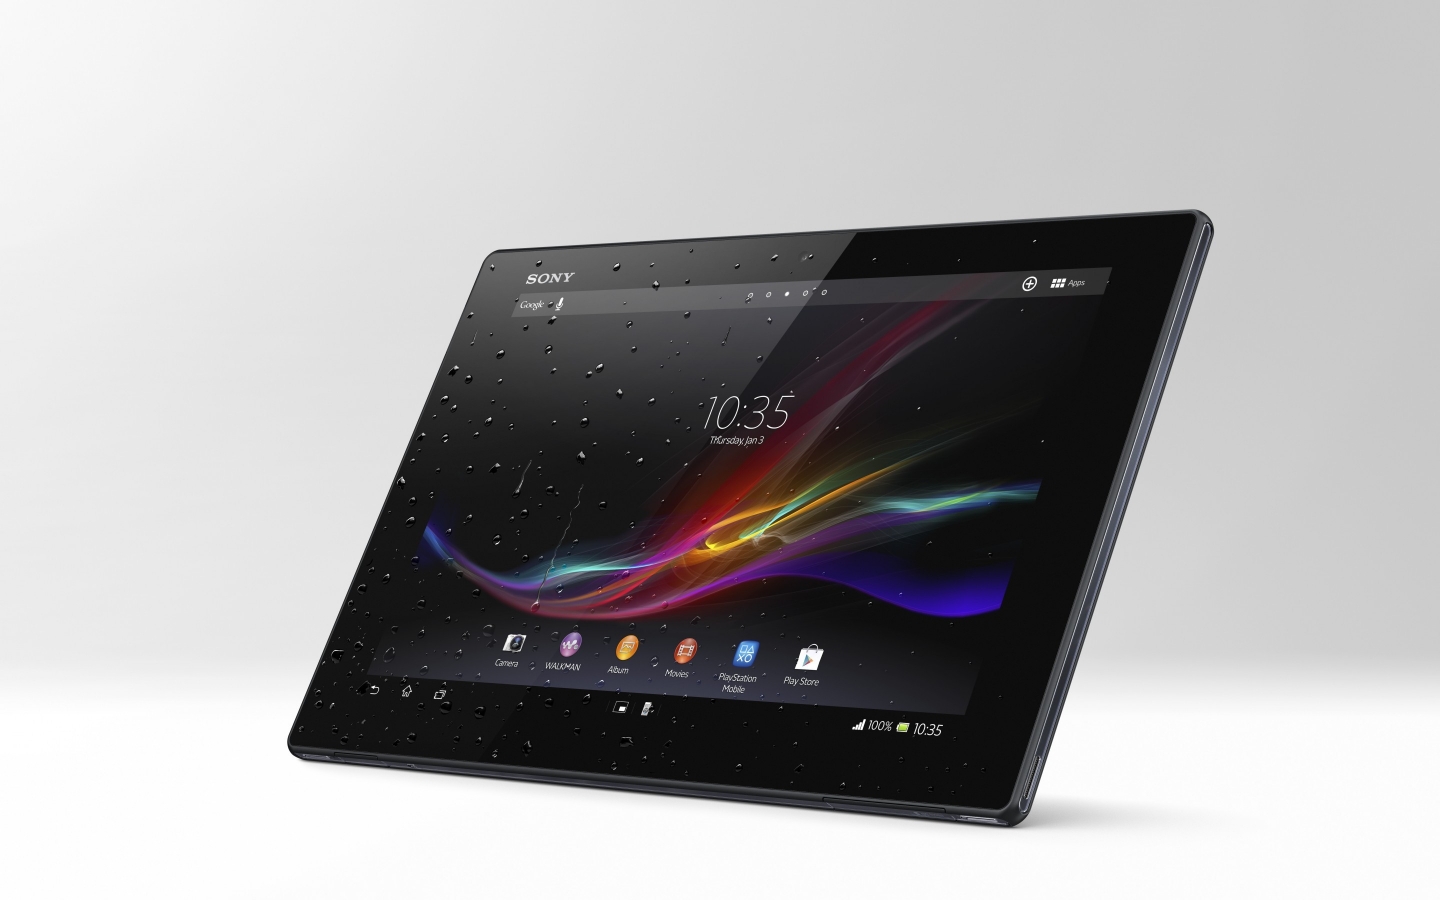 New Sony Xperia Z Tablet for 1440 x 900 widescreen resolution